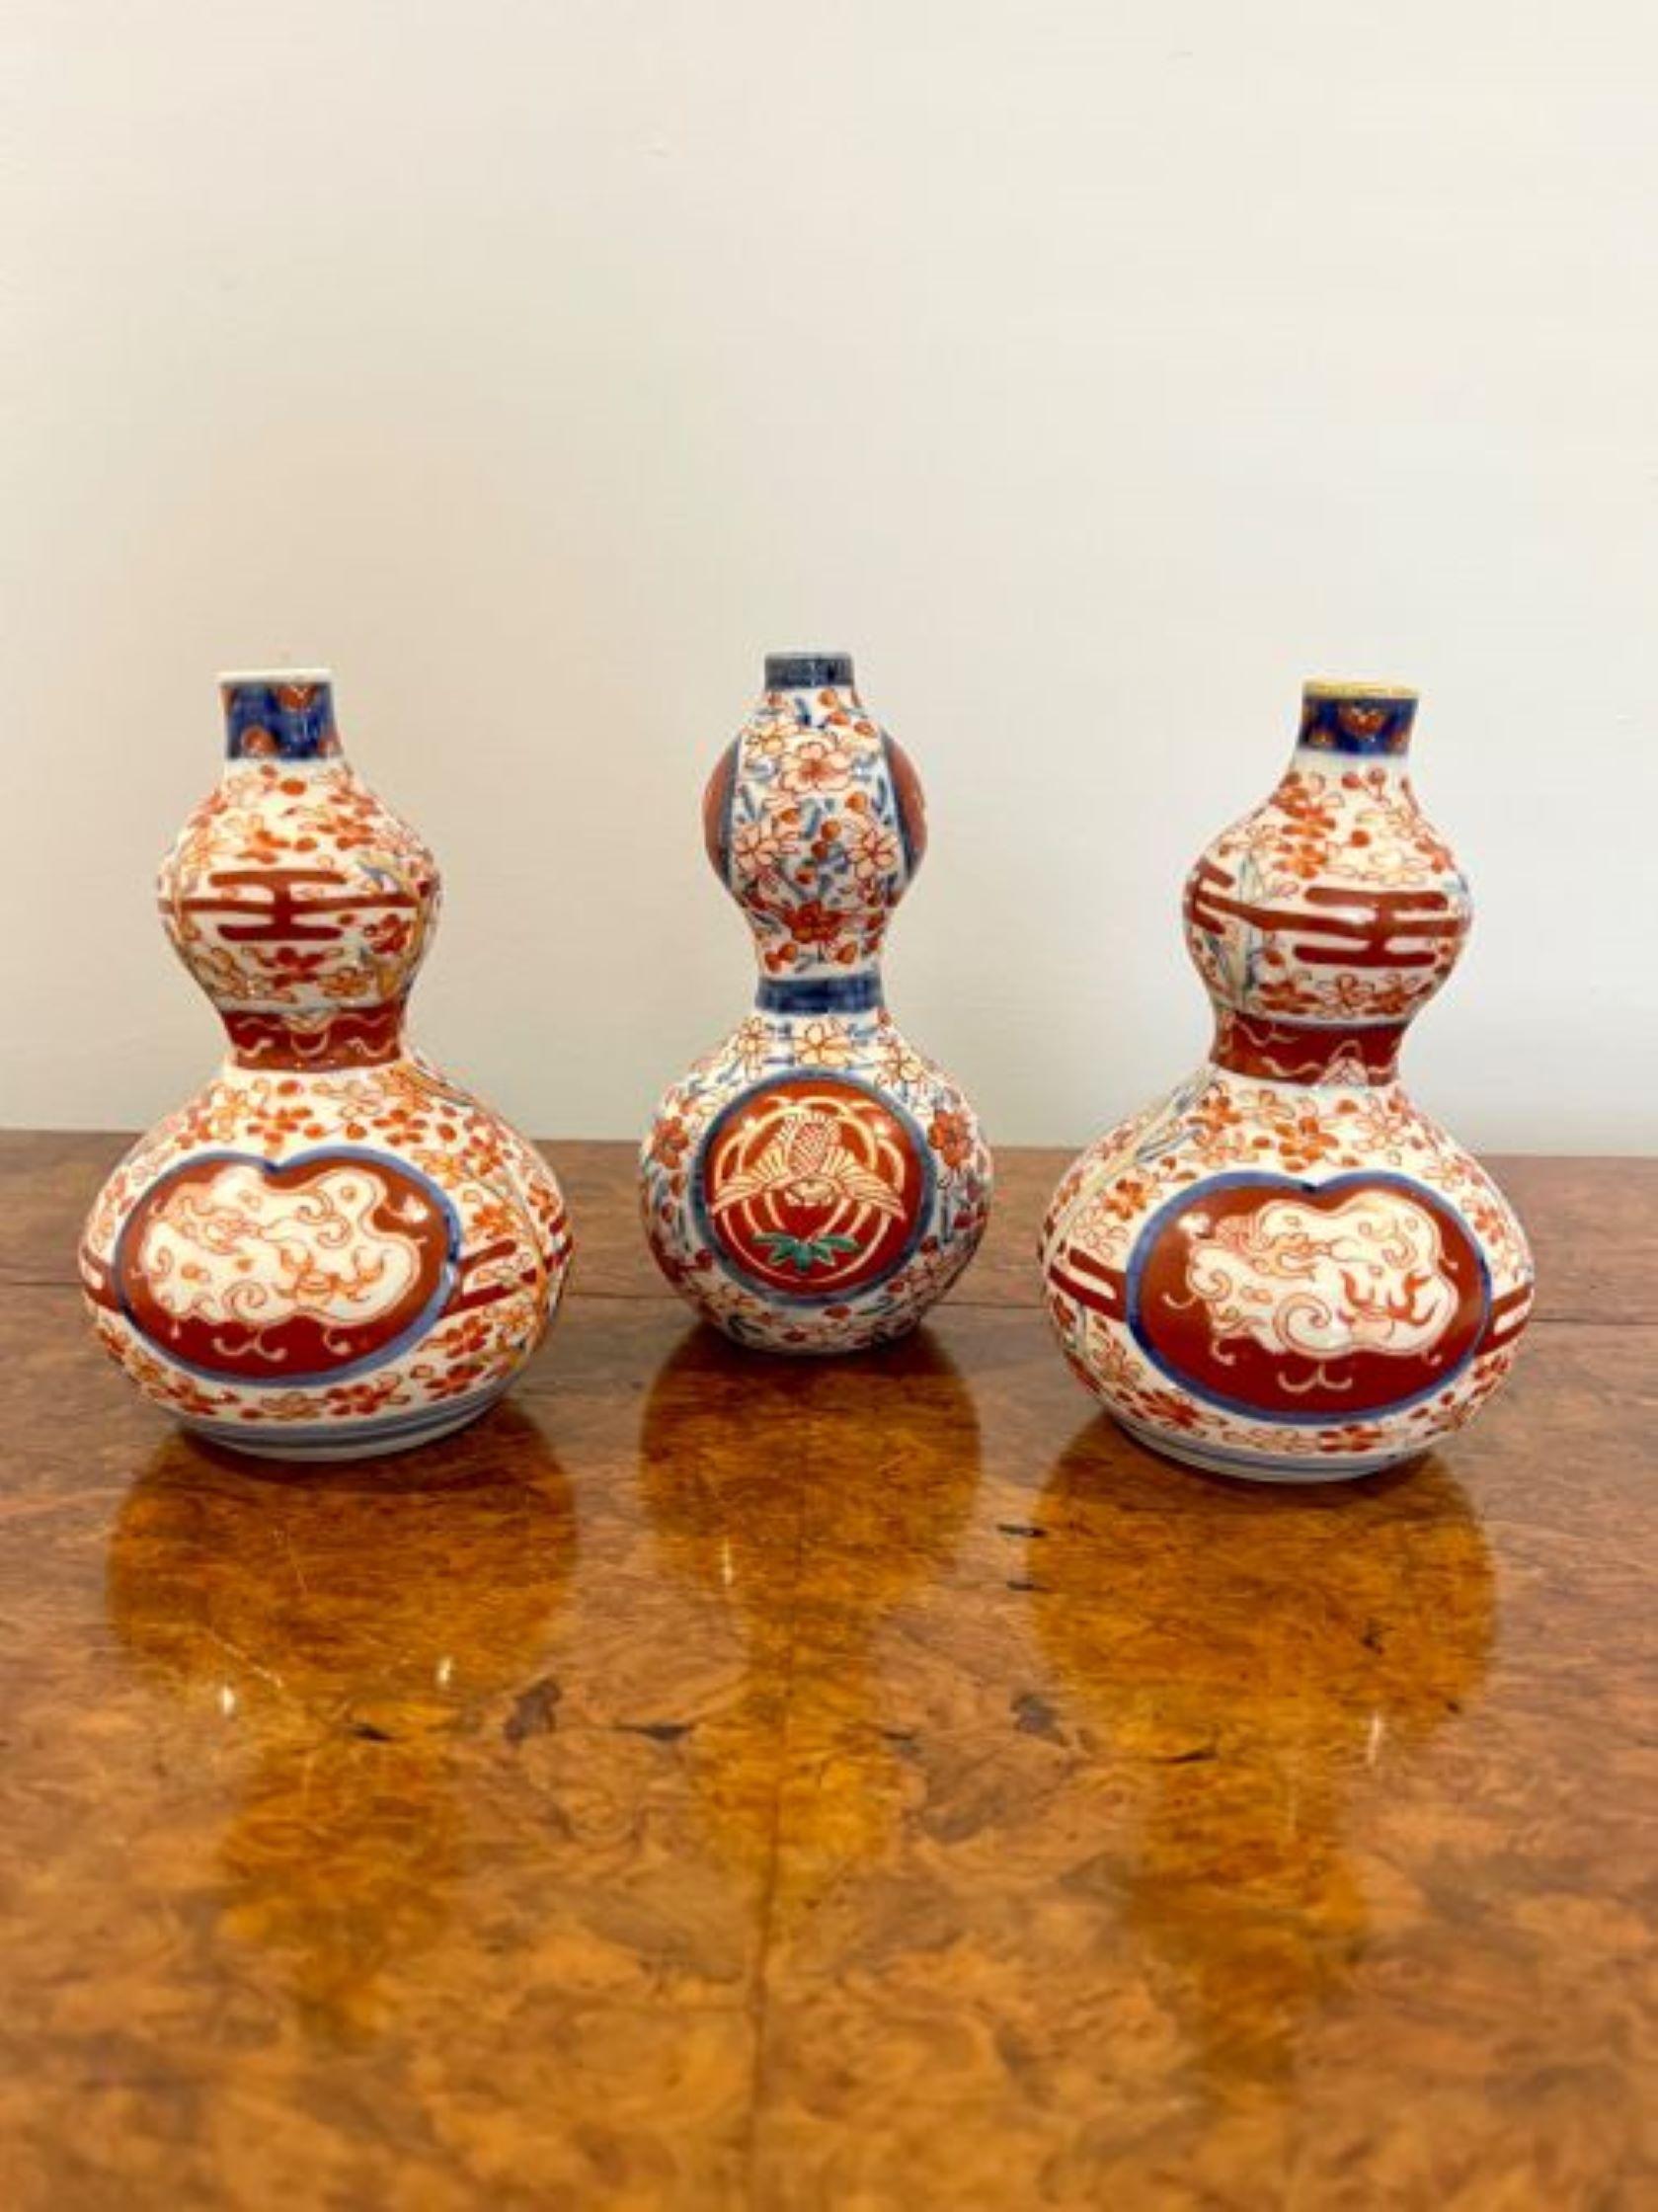 Quality collection of five small antique Japanese shaped Imari vases having a quality collection of five Imari shaped vases, having five different shaped vases hand painted in wonderful red, blue, orange and white colours decorated with flowers,